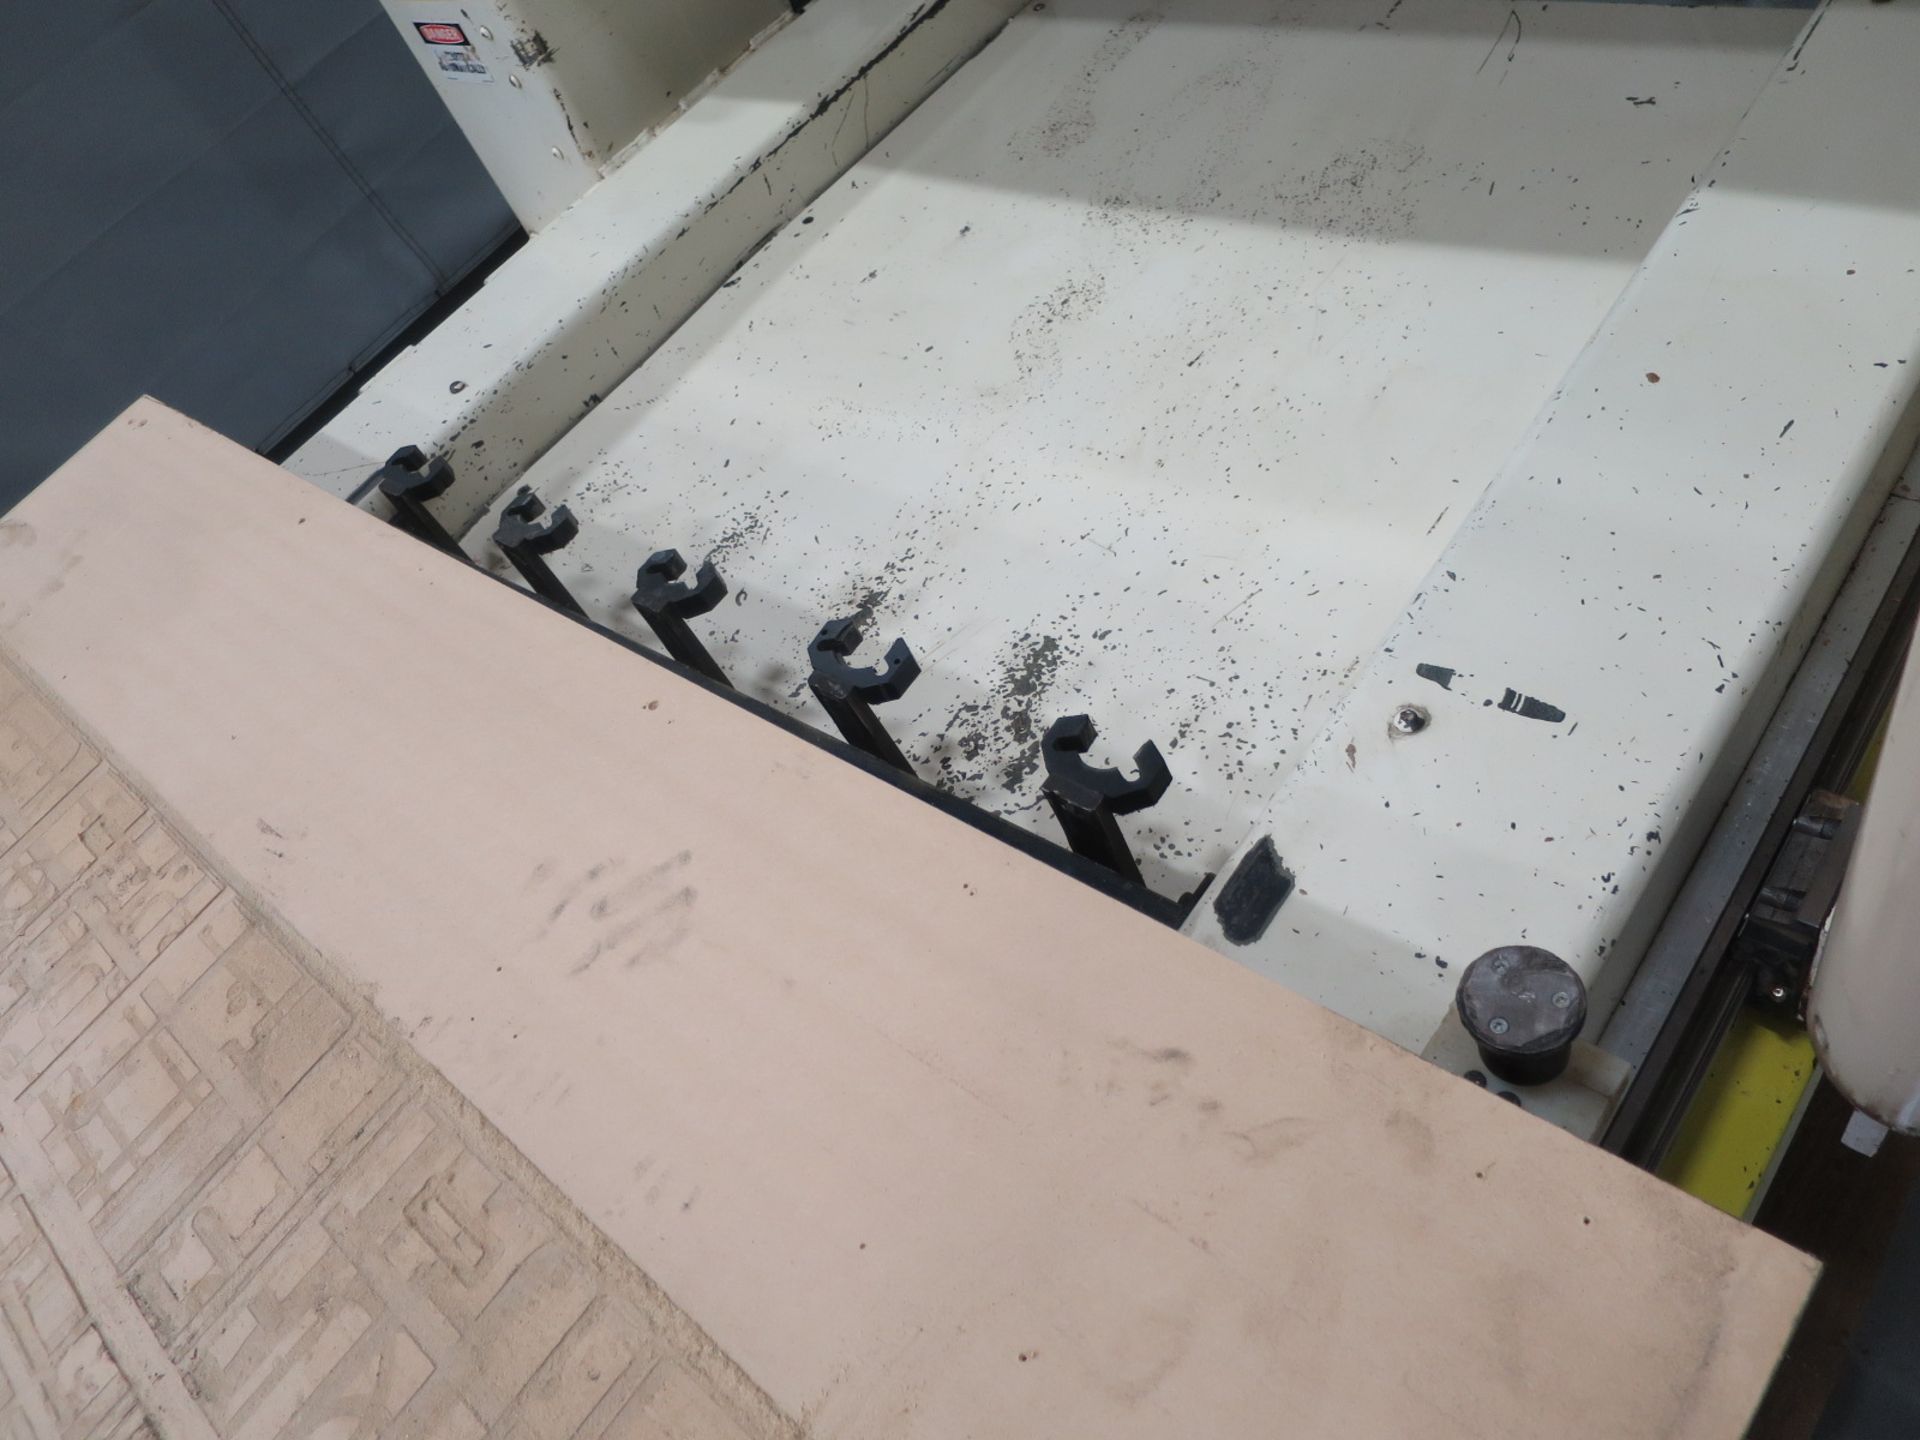 5'X10' Thermwood C53 3-Axis CNC Router w/Qcore Upgrade, , S/N C530550596, New 1996, - Image 5 of 6